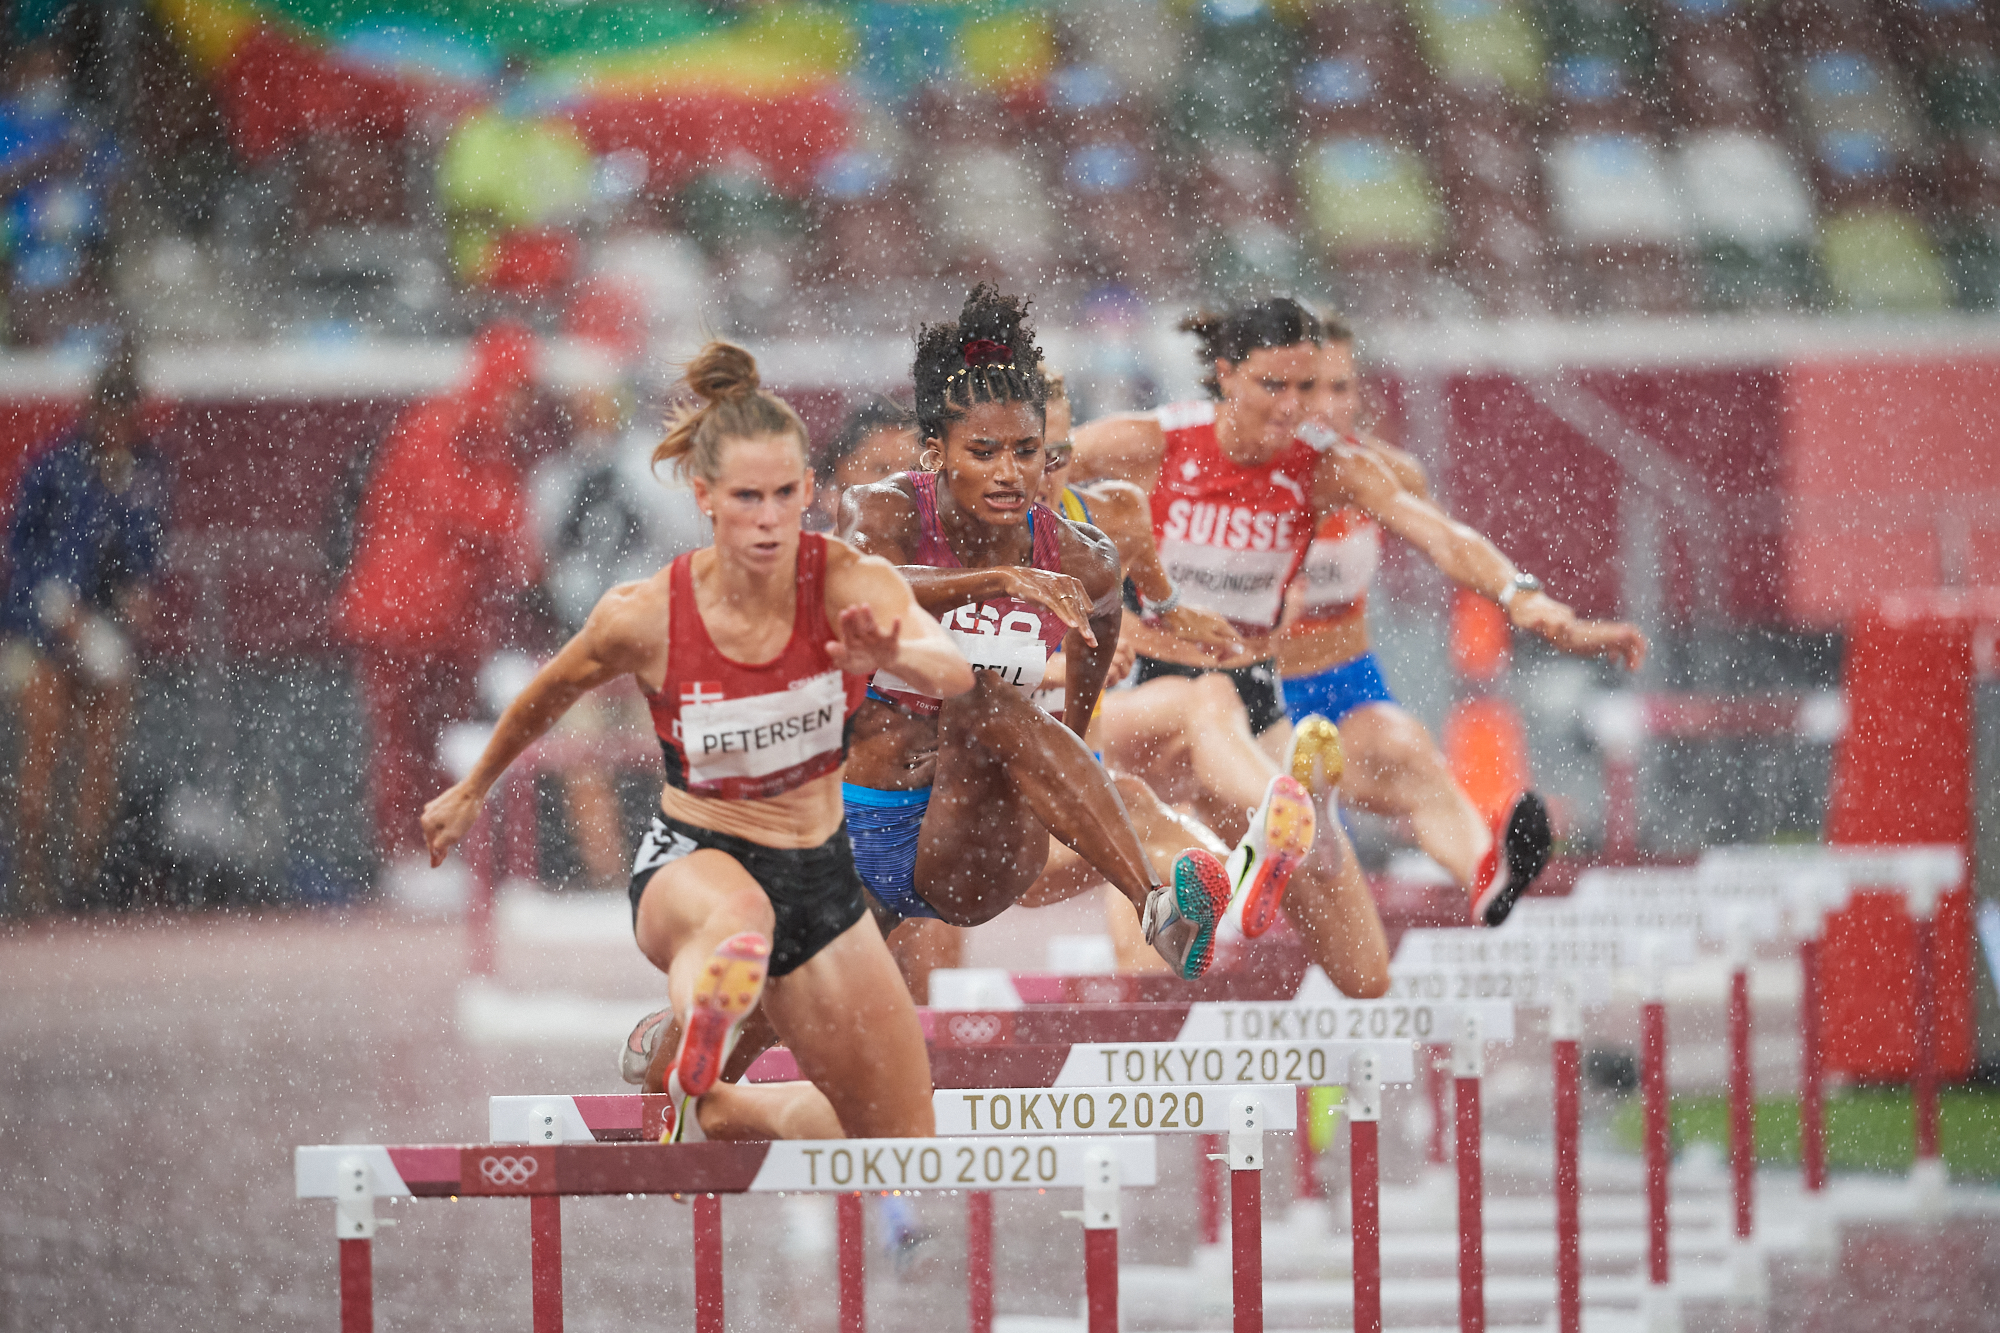 Photo of Team USA's Anna Cockrell  in the women's 400m hurdle semi-finals (in a rain storm) during the Tokyo 2020 Olympics at the Olympic Stadium in Tokyo, Japan.